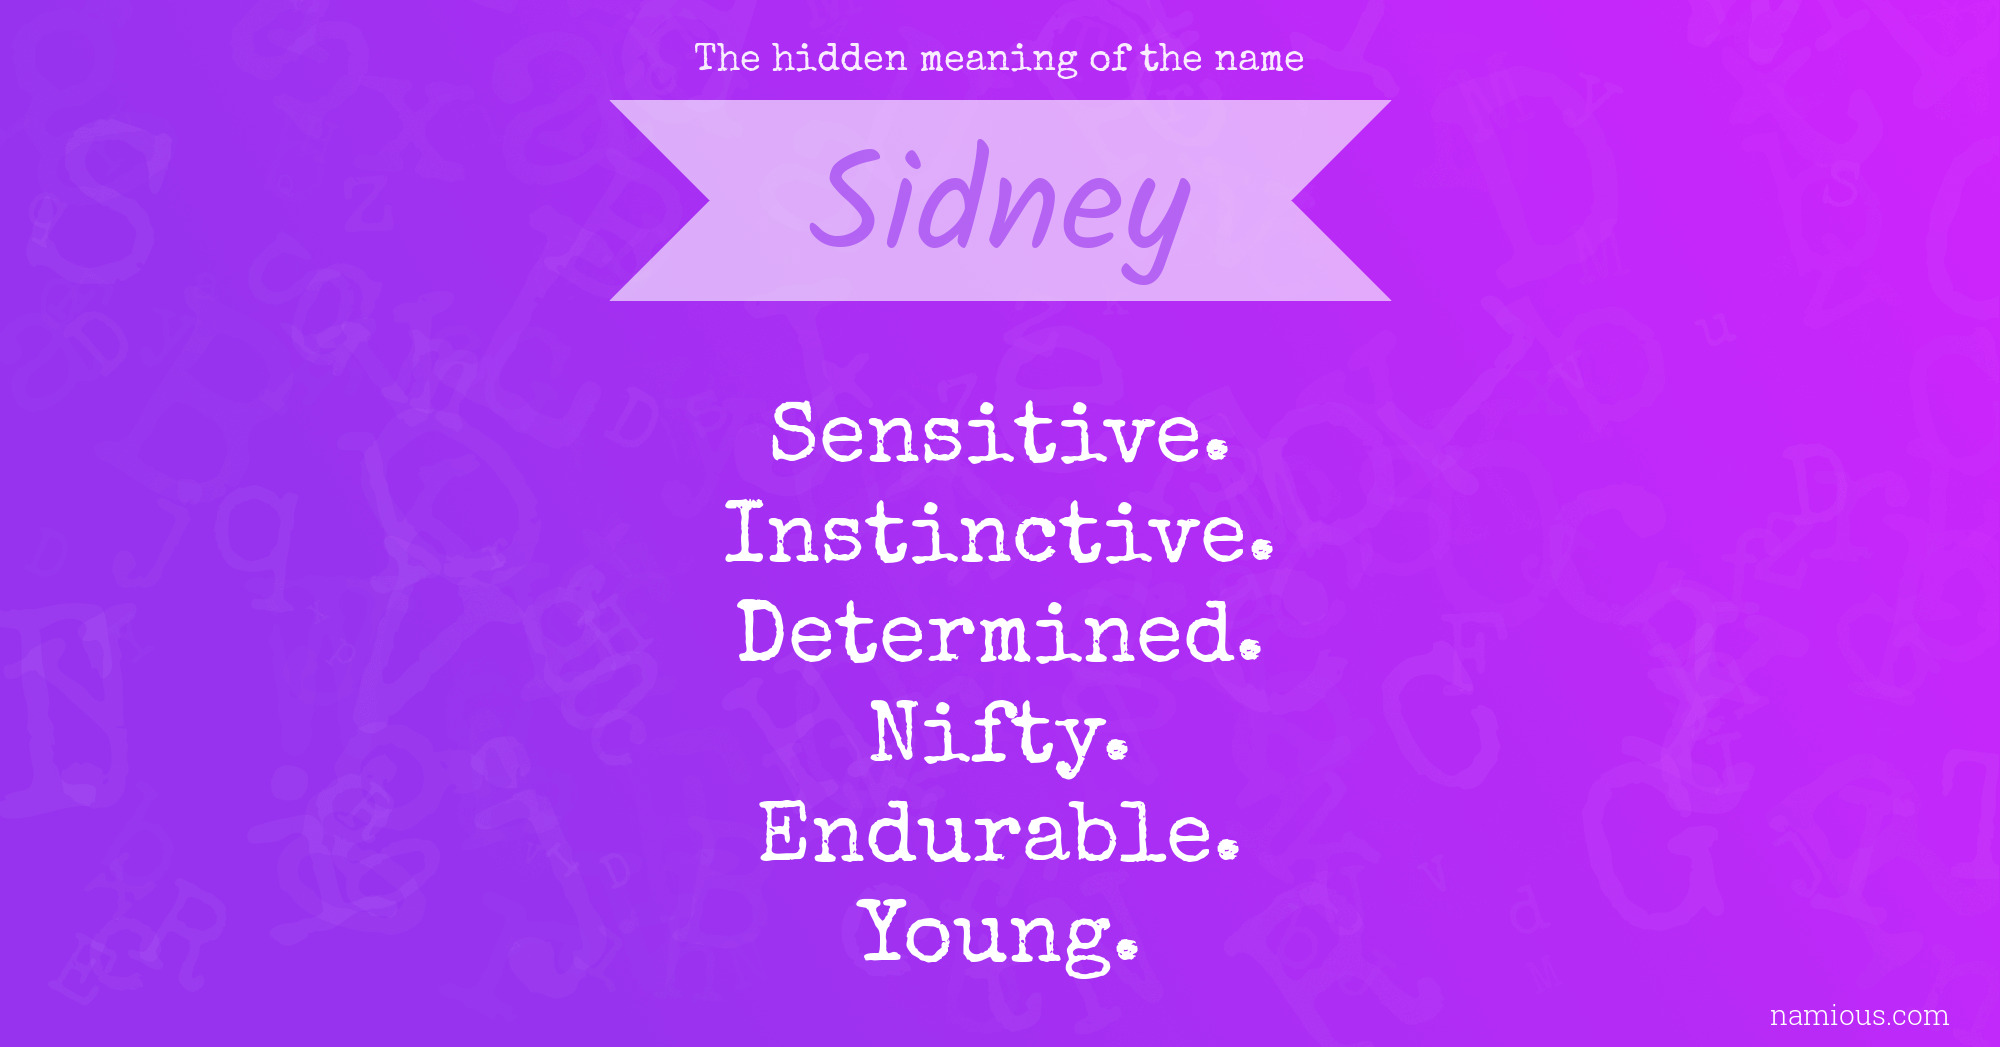 The hidden meaning of the name Sidney